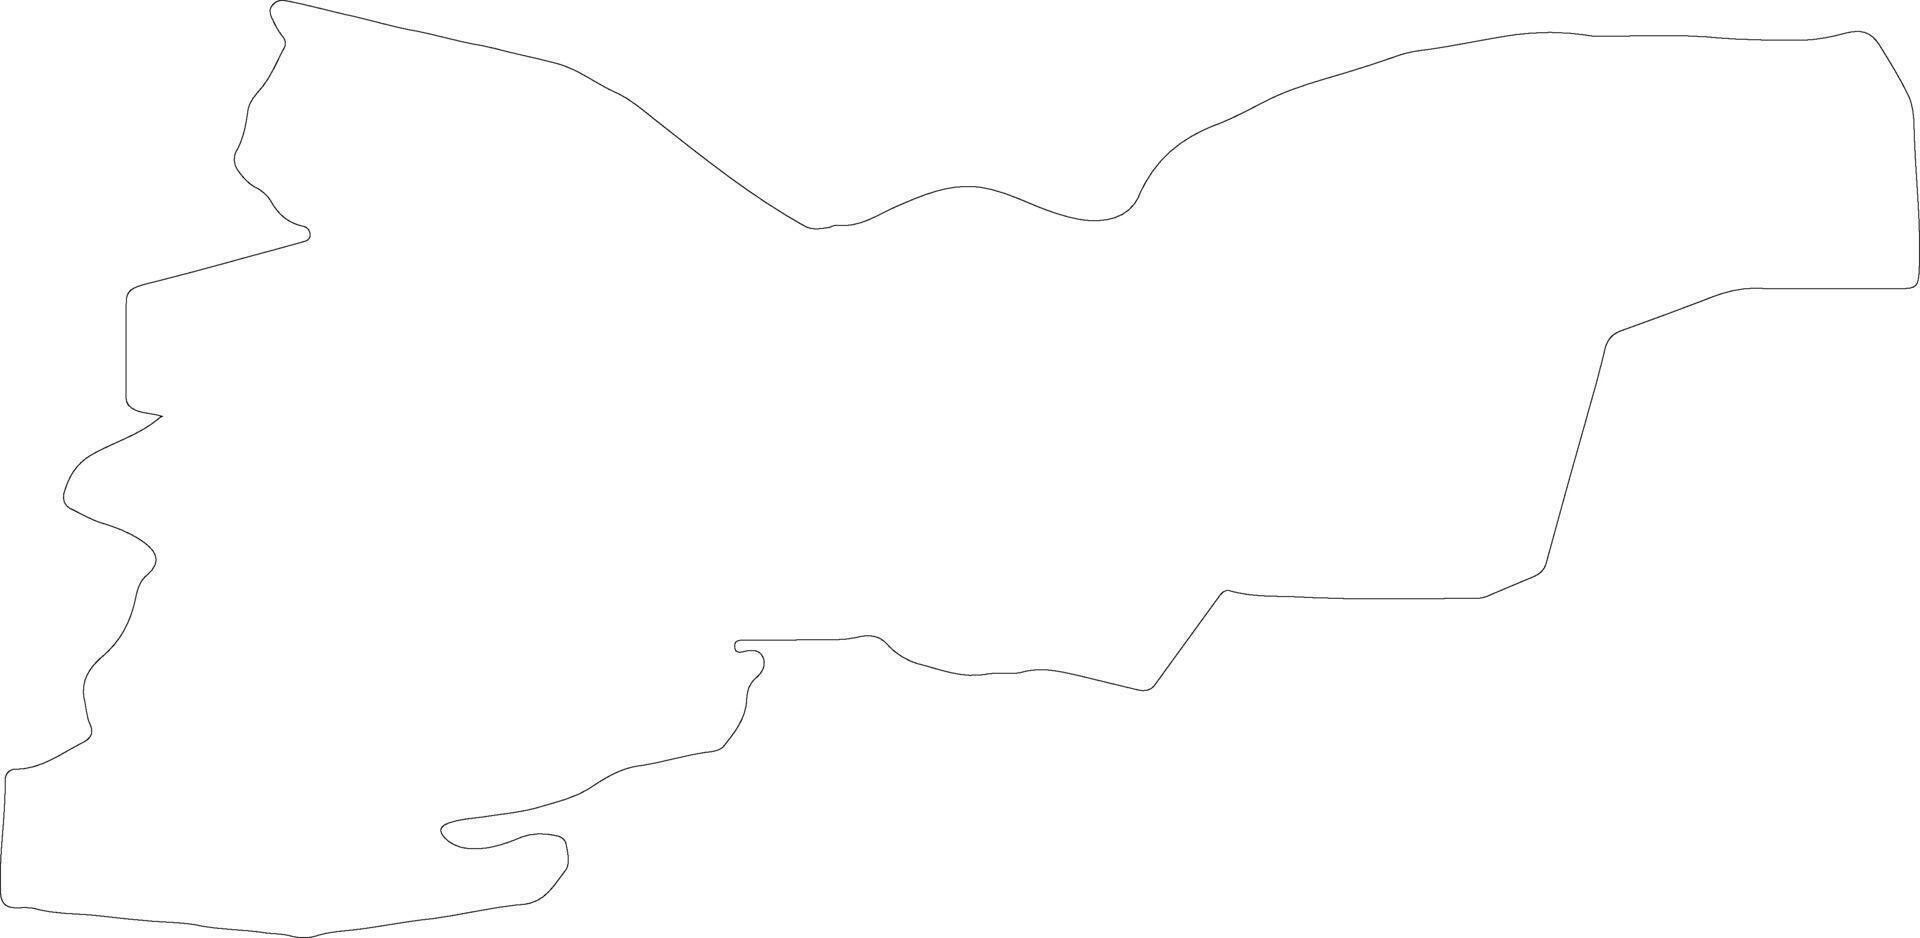 Apes Latvia outline map vector